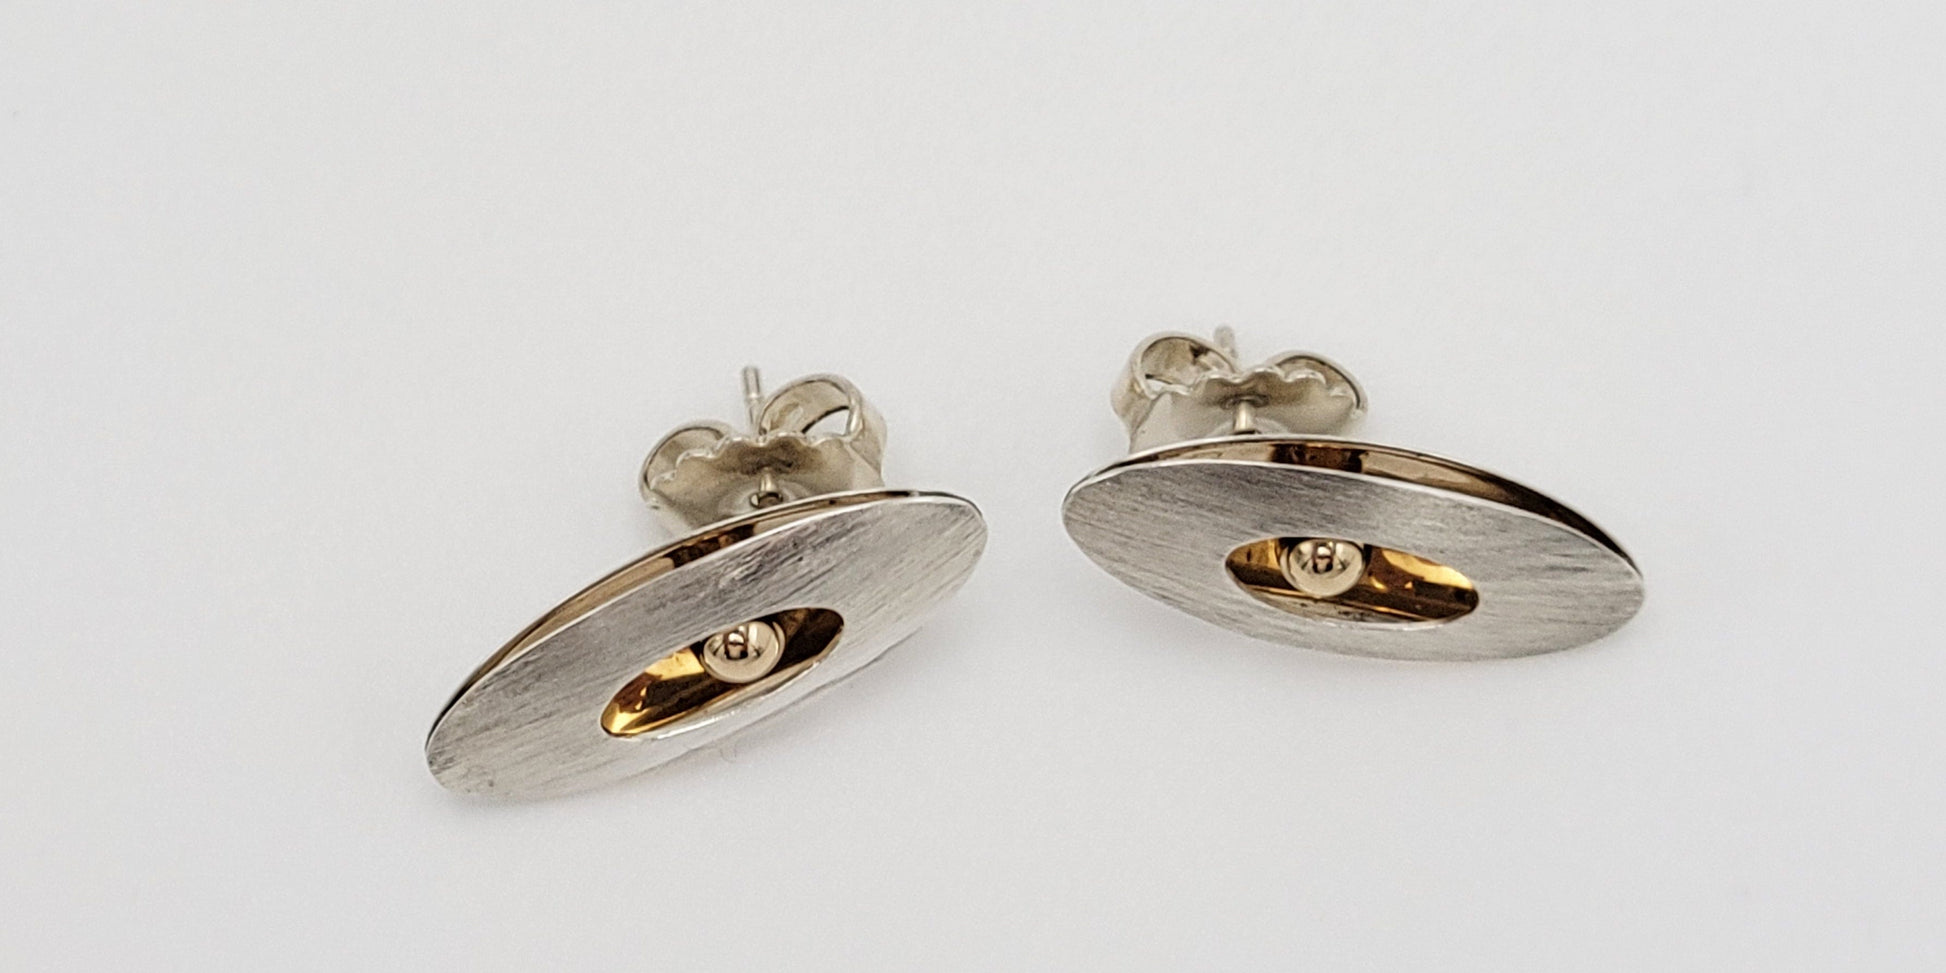 Vintage Sterling Silver Modernist Abstract Cut Out Cufflinks 